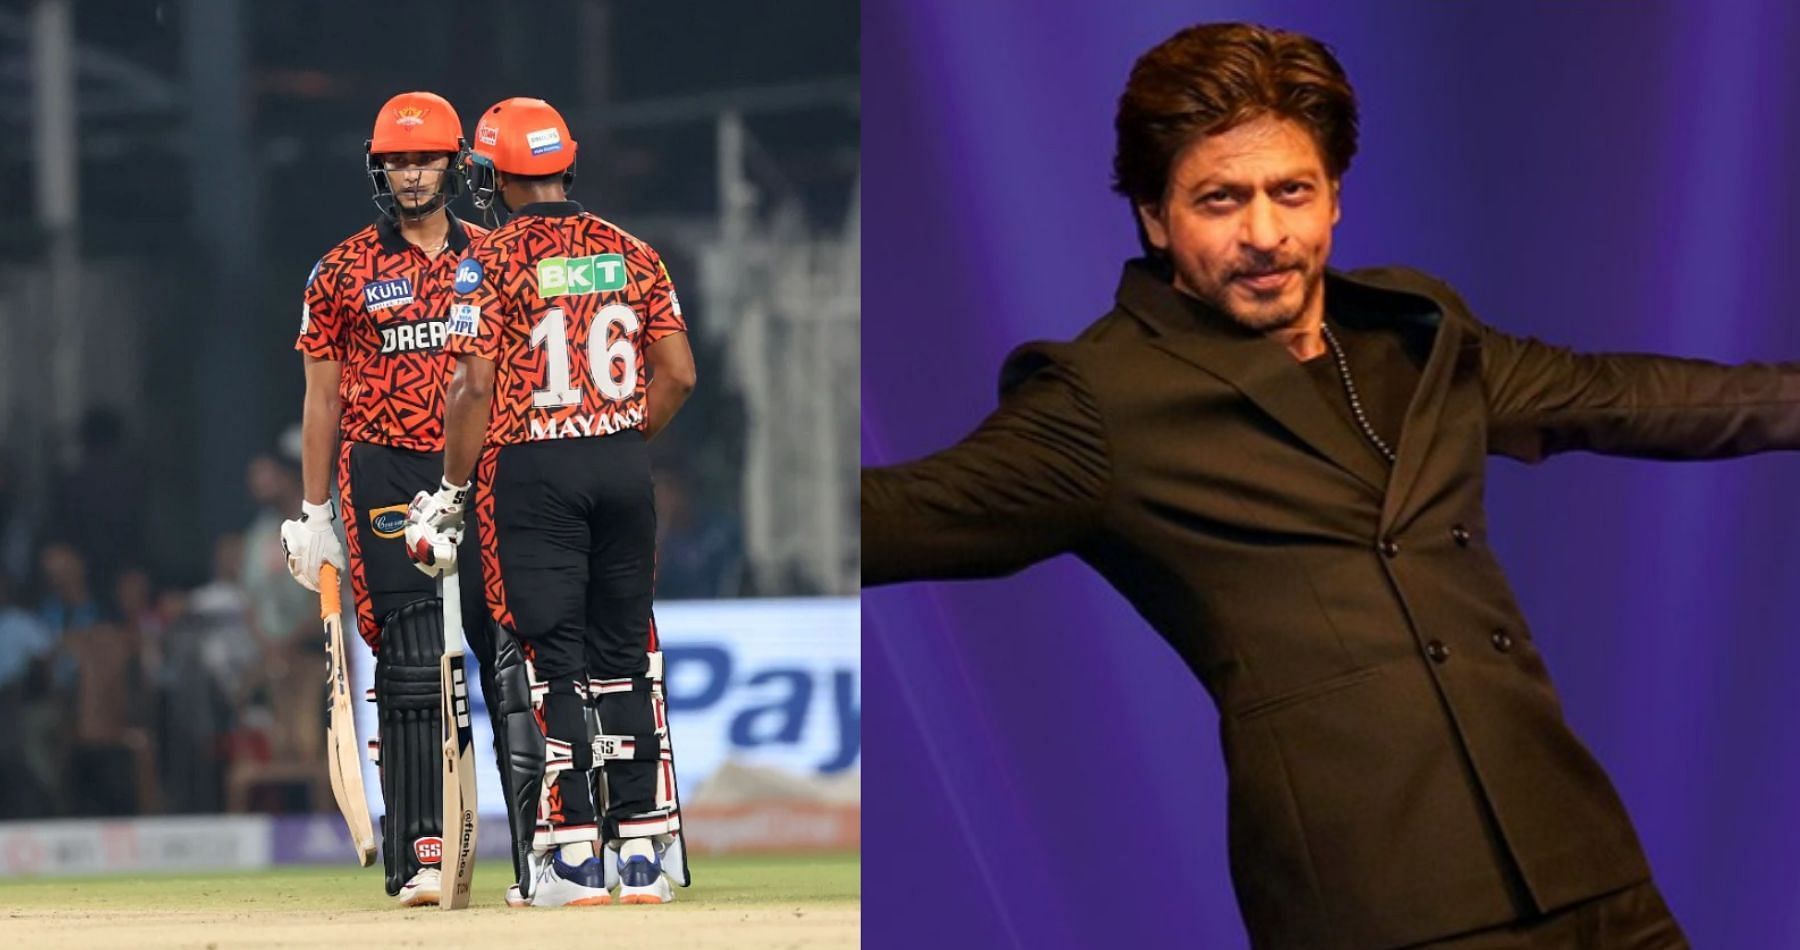 Picture Courtesy: IPL And Bollywood Hungama